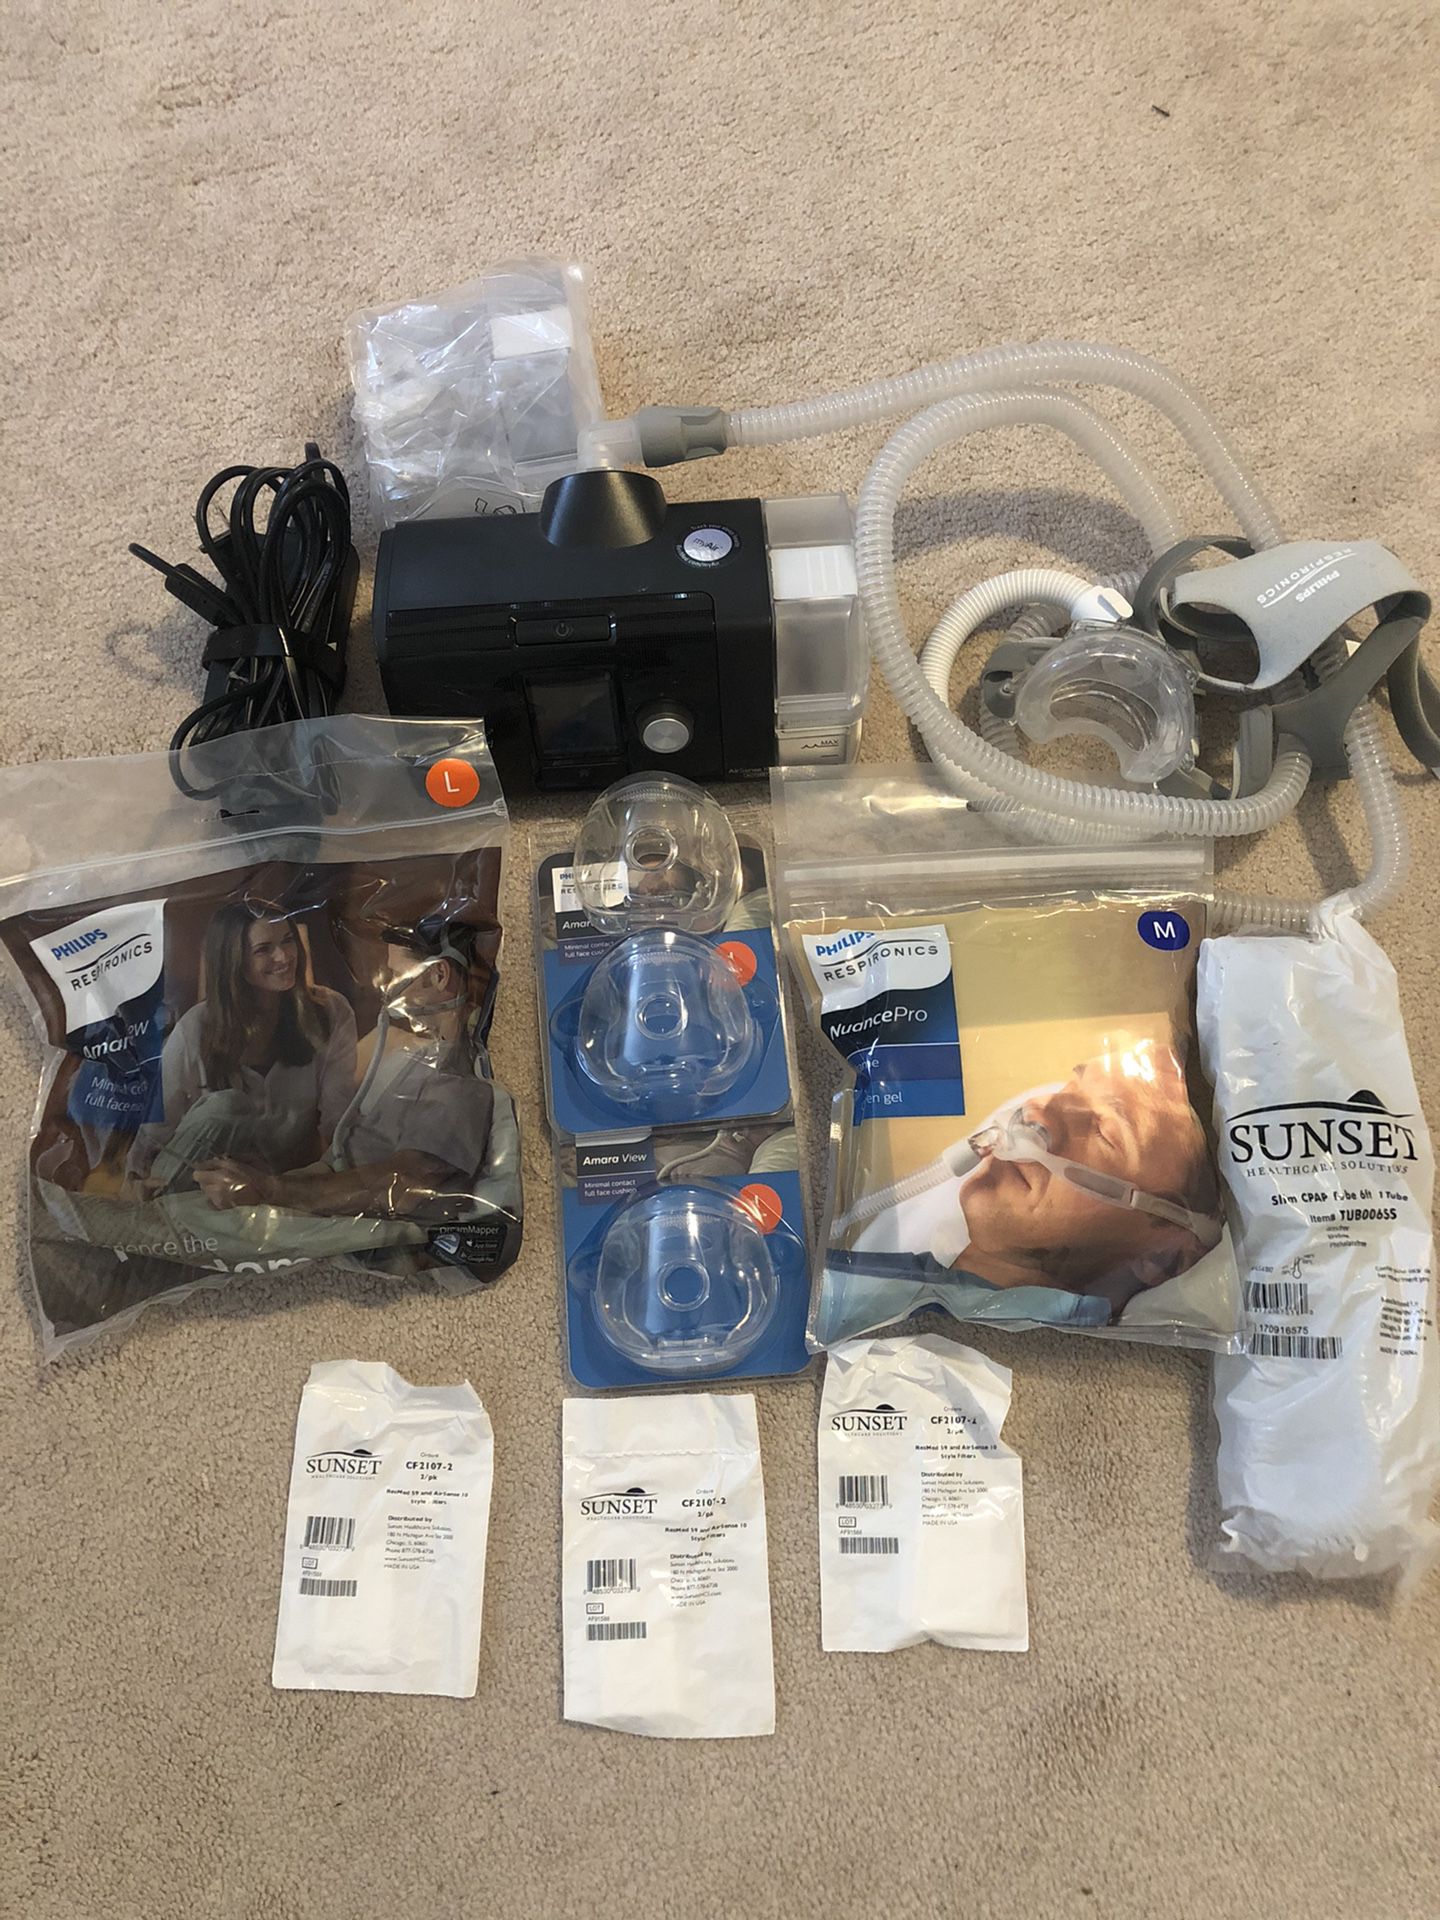 ResMed AirSense 10 CPAP w/ accessories